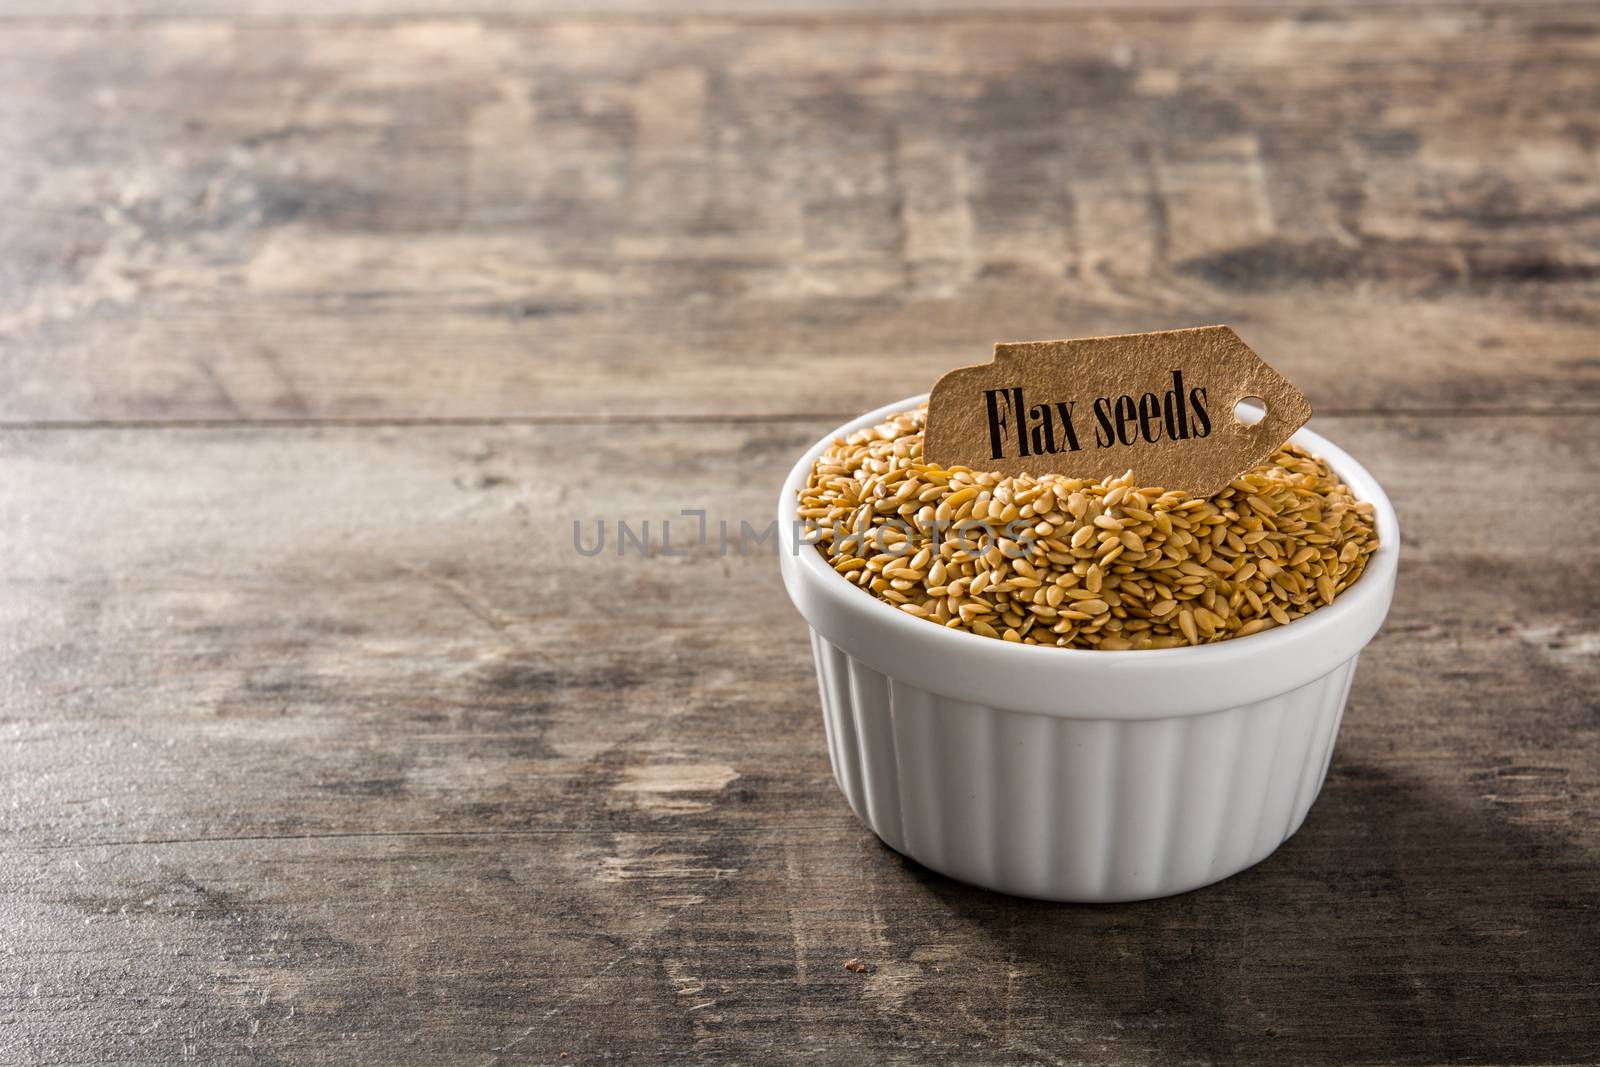 Golden flax seeds in white bowl on wooden table